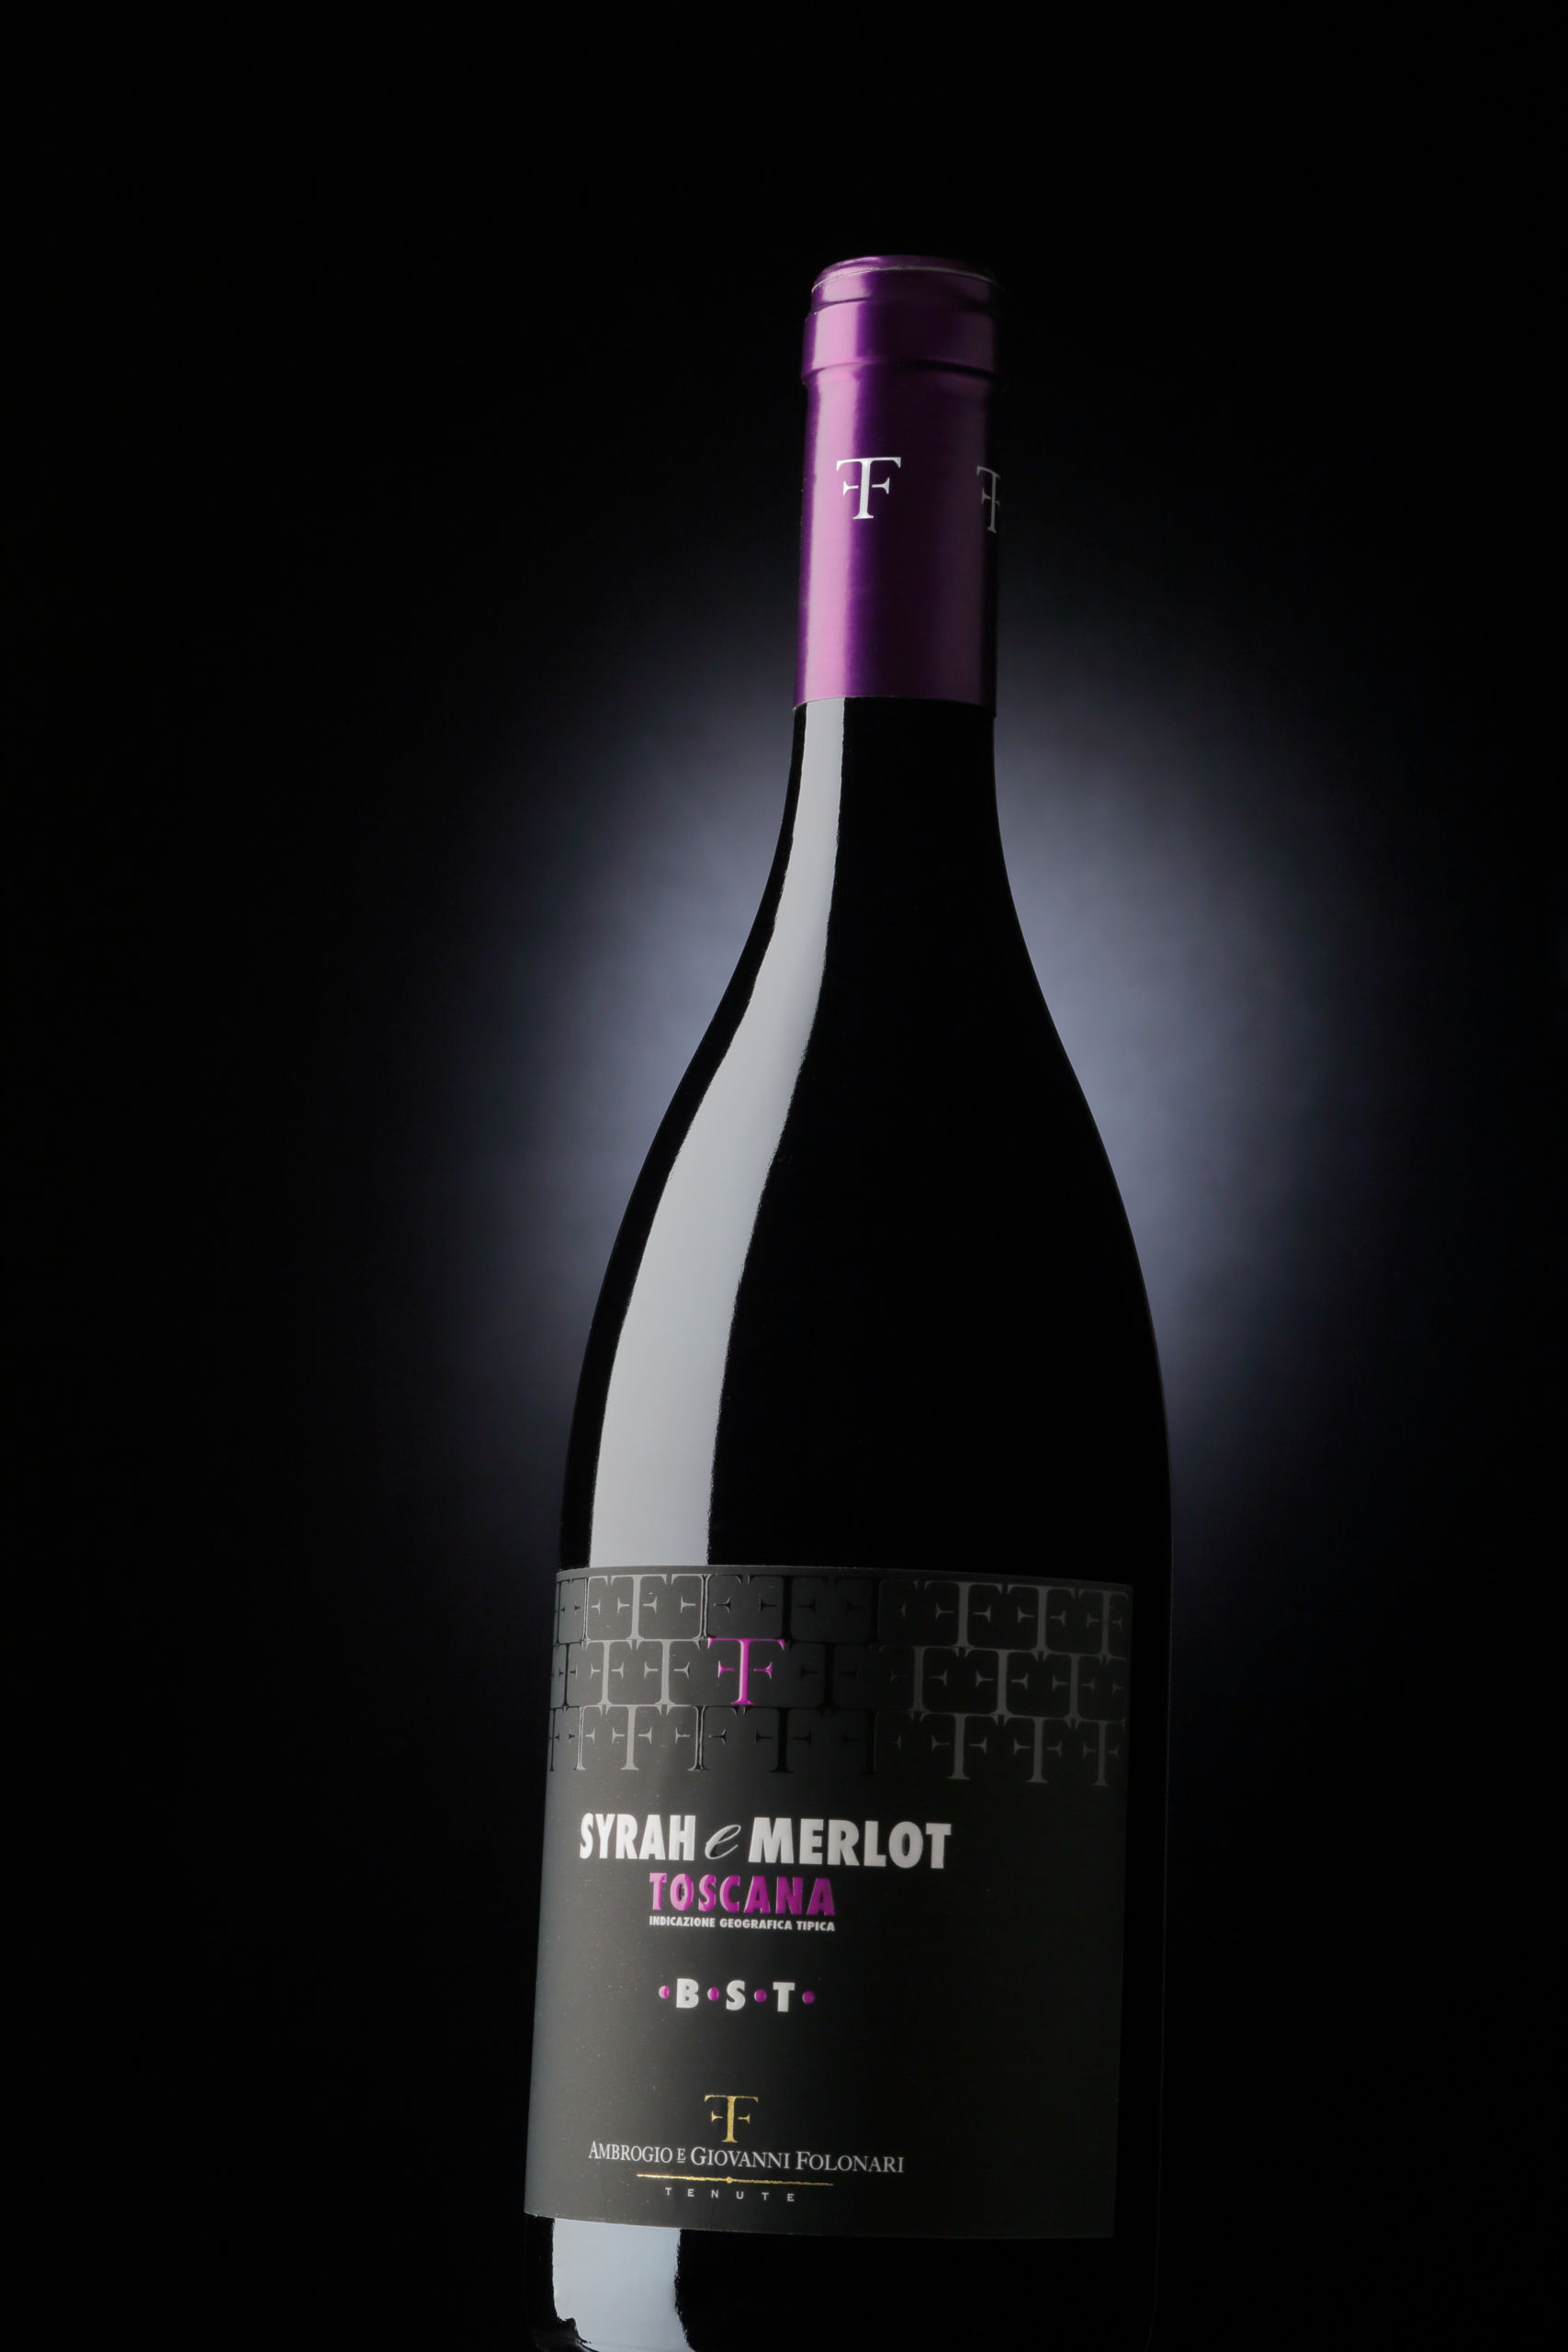 Syrah e Merlot, the new blend of the  Baby Super Tuscan variety